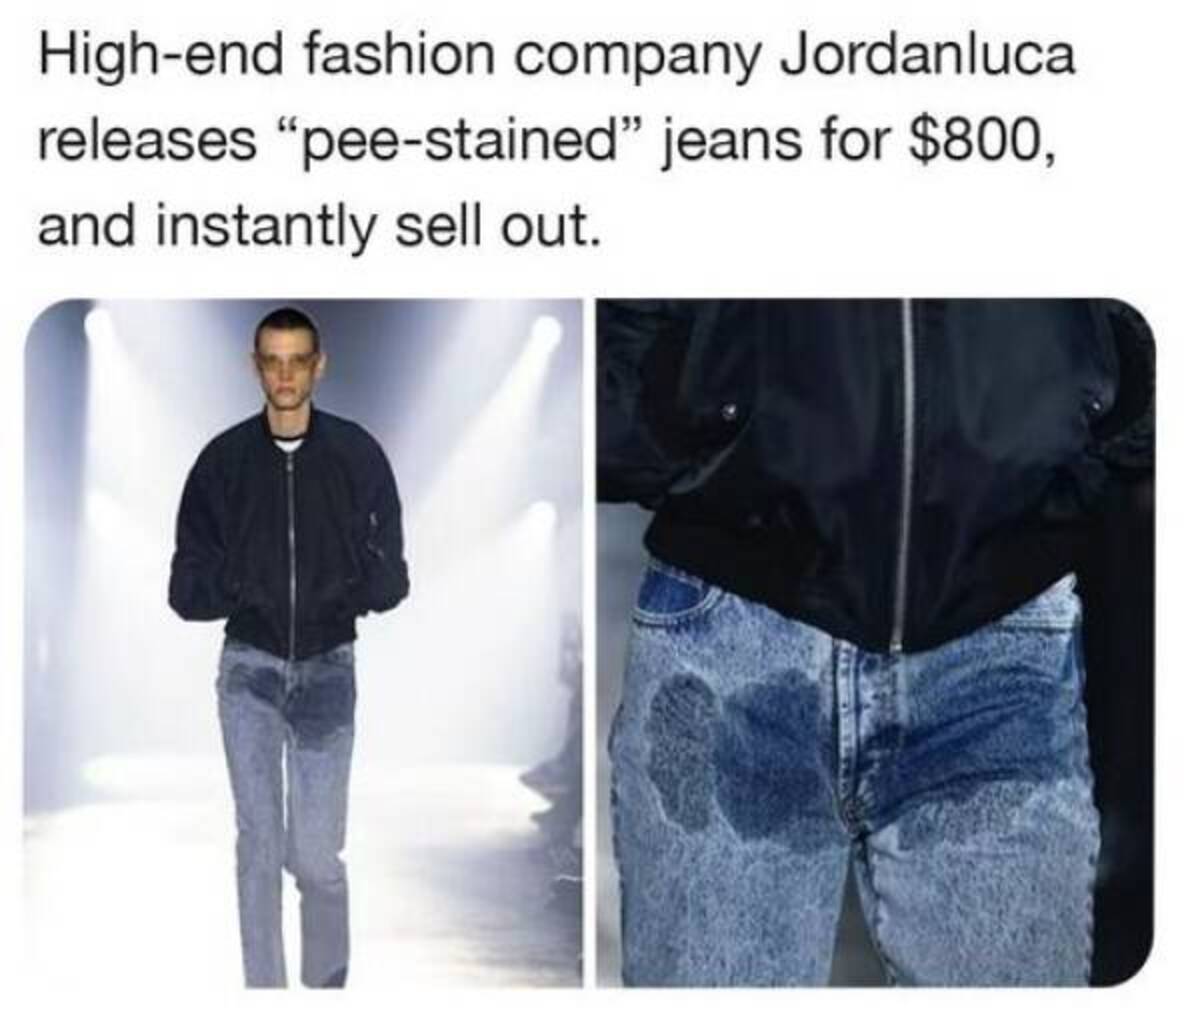 Jeans - Highend fashion company Jordanluca releases "peestained" jeans for $800, and instantly sell out.